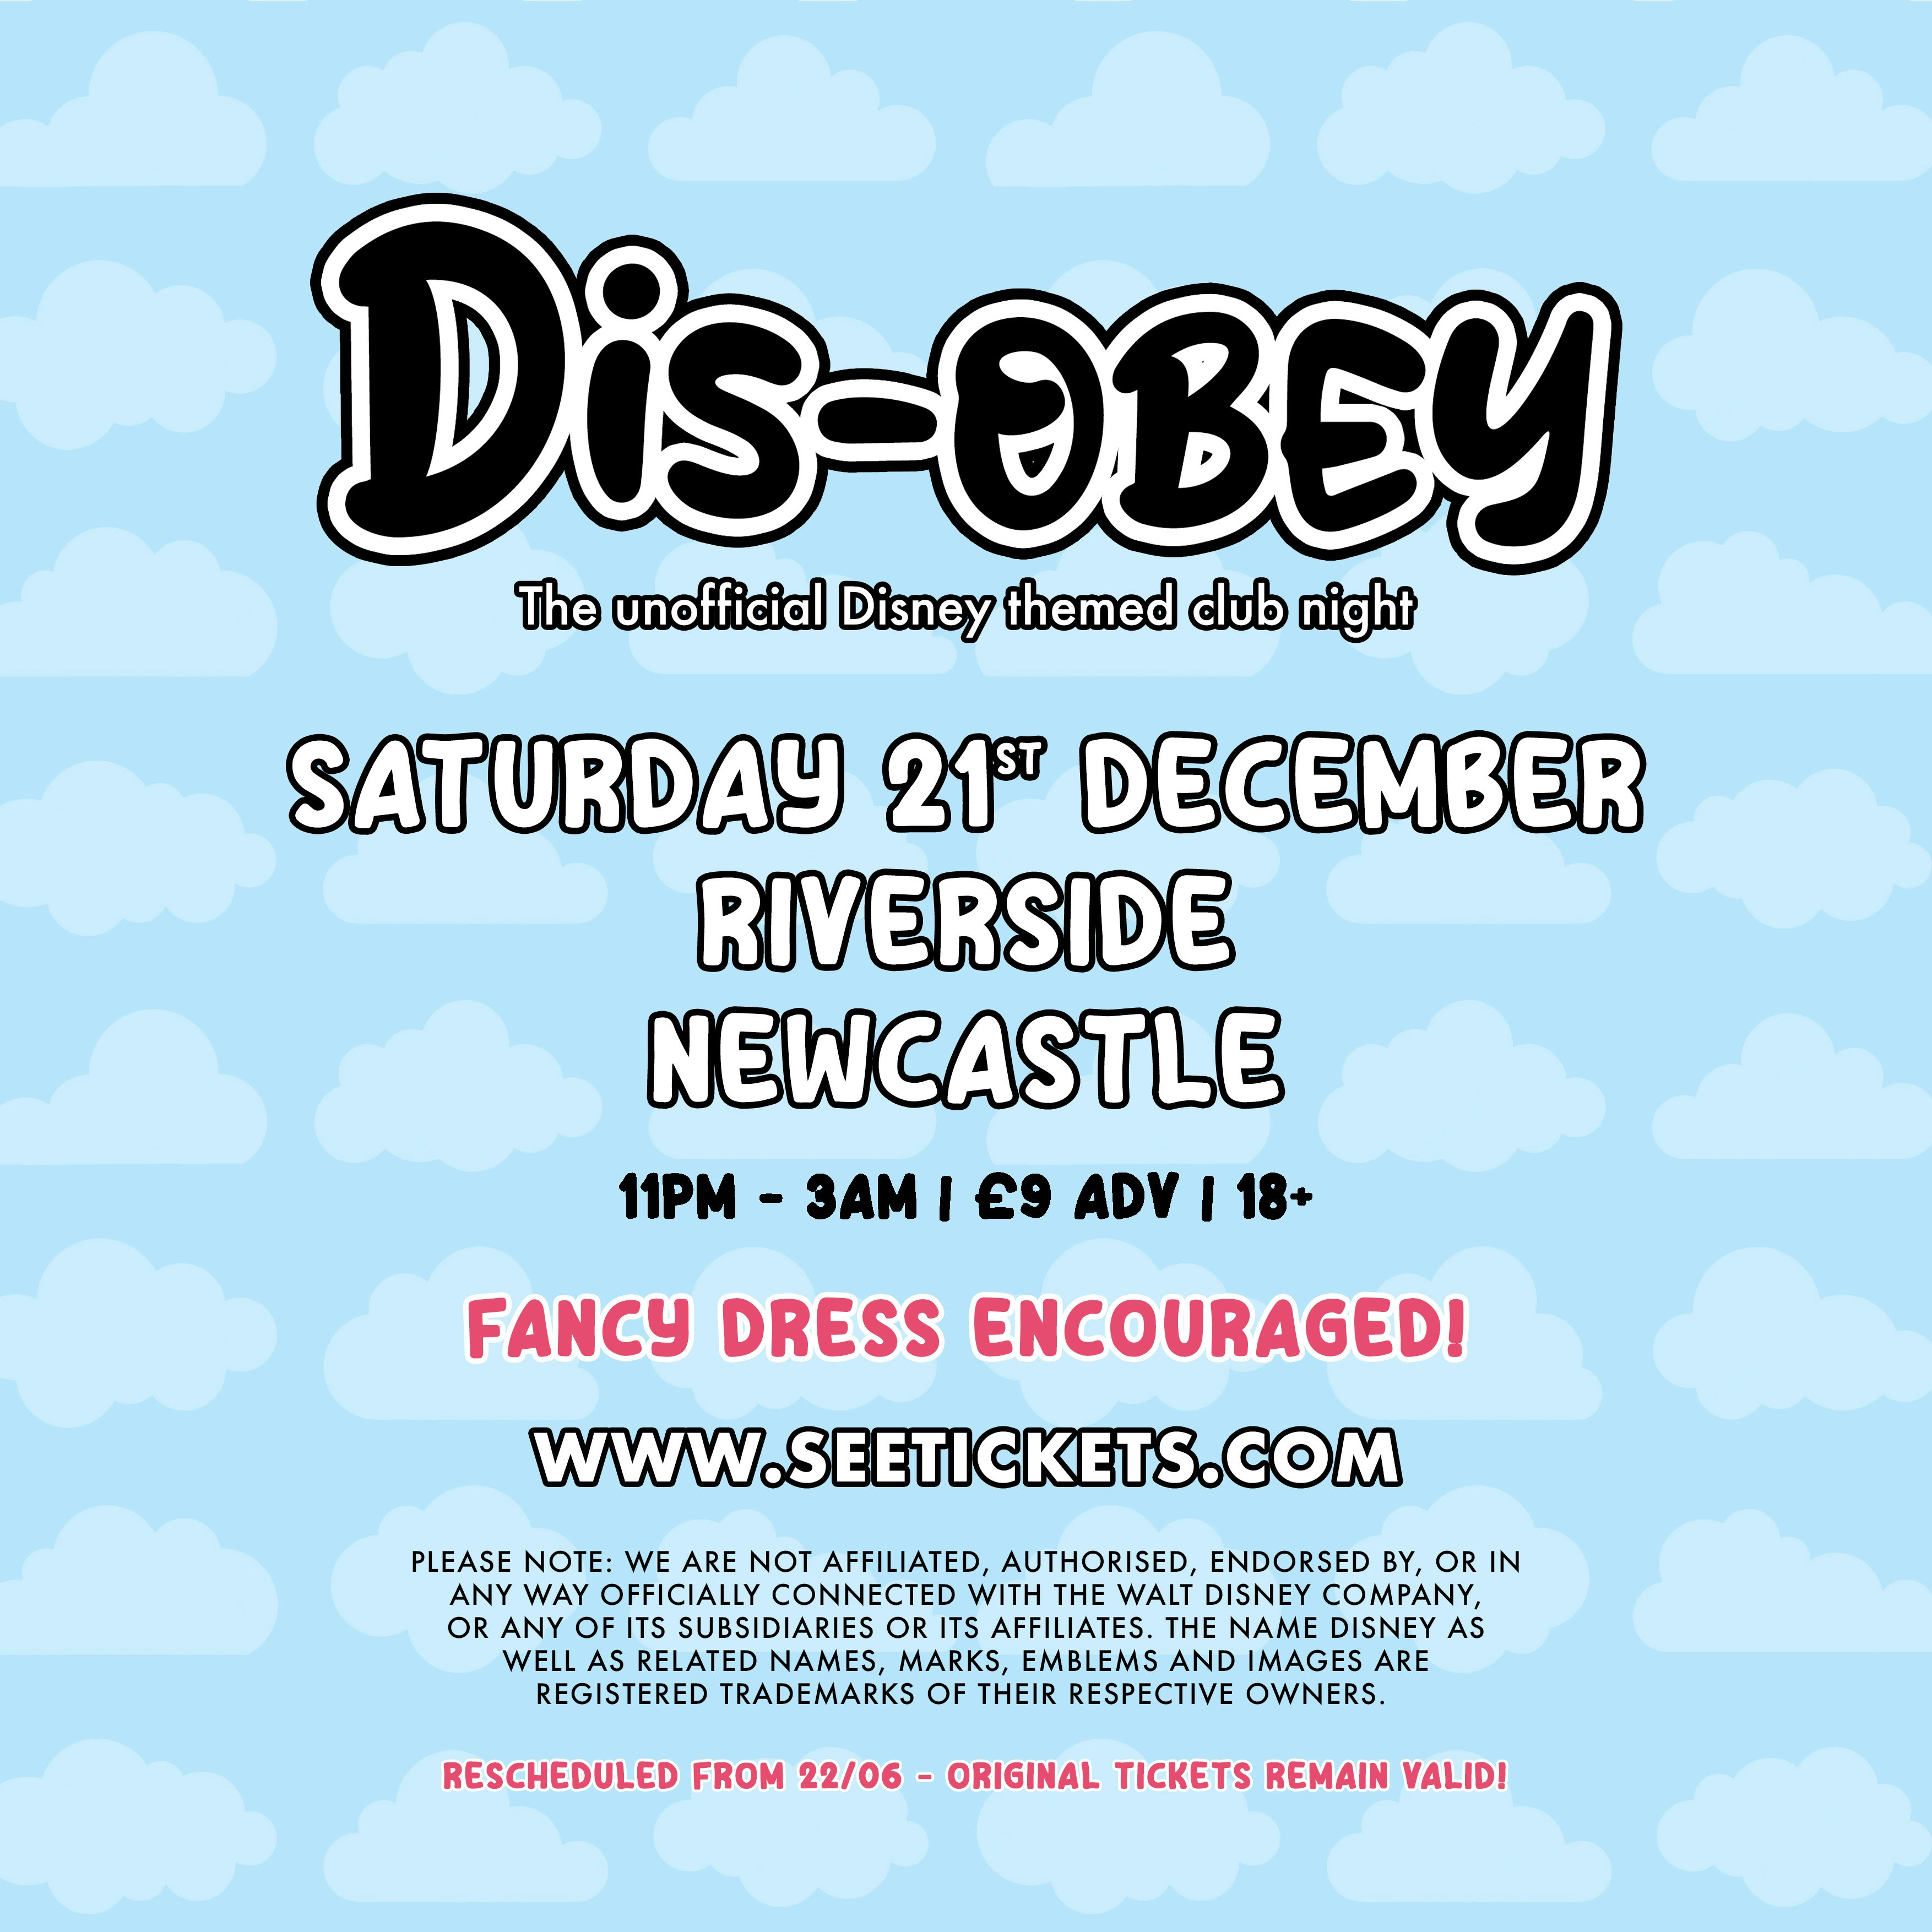 Dis-Obey: The Unofficial Disney Themed Clubnight